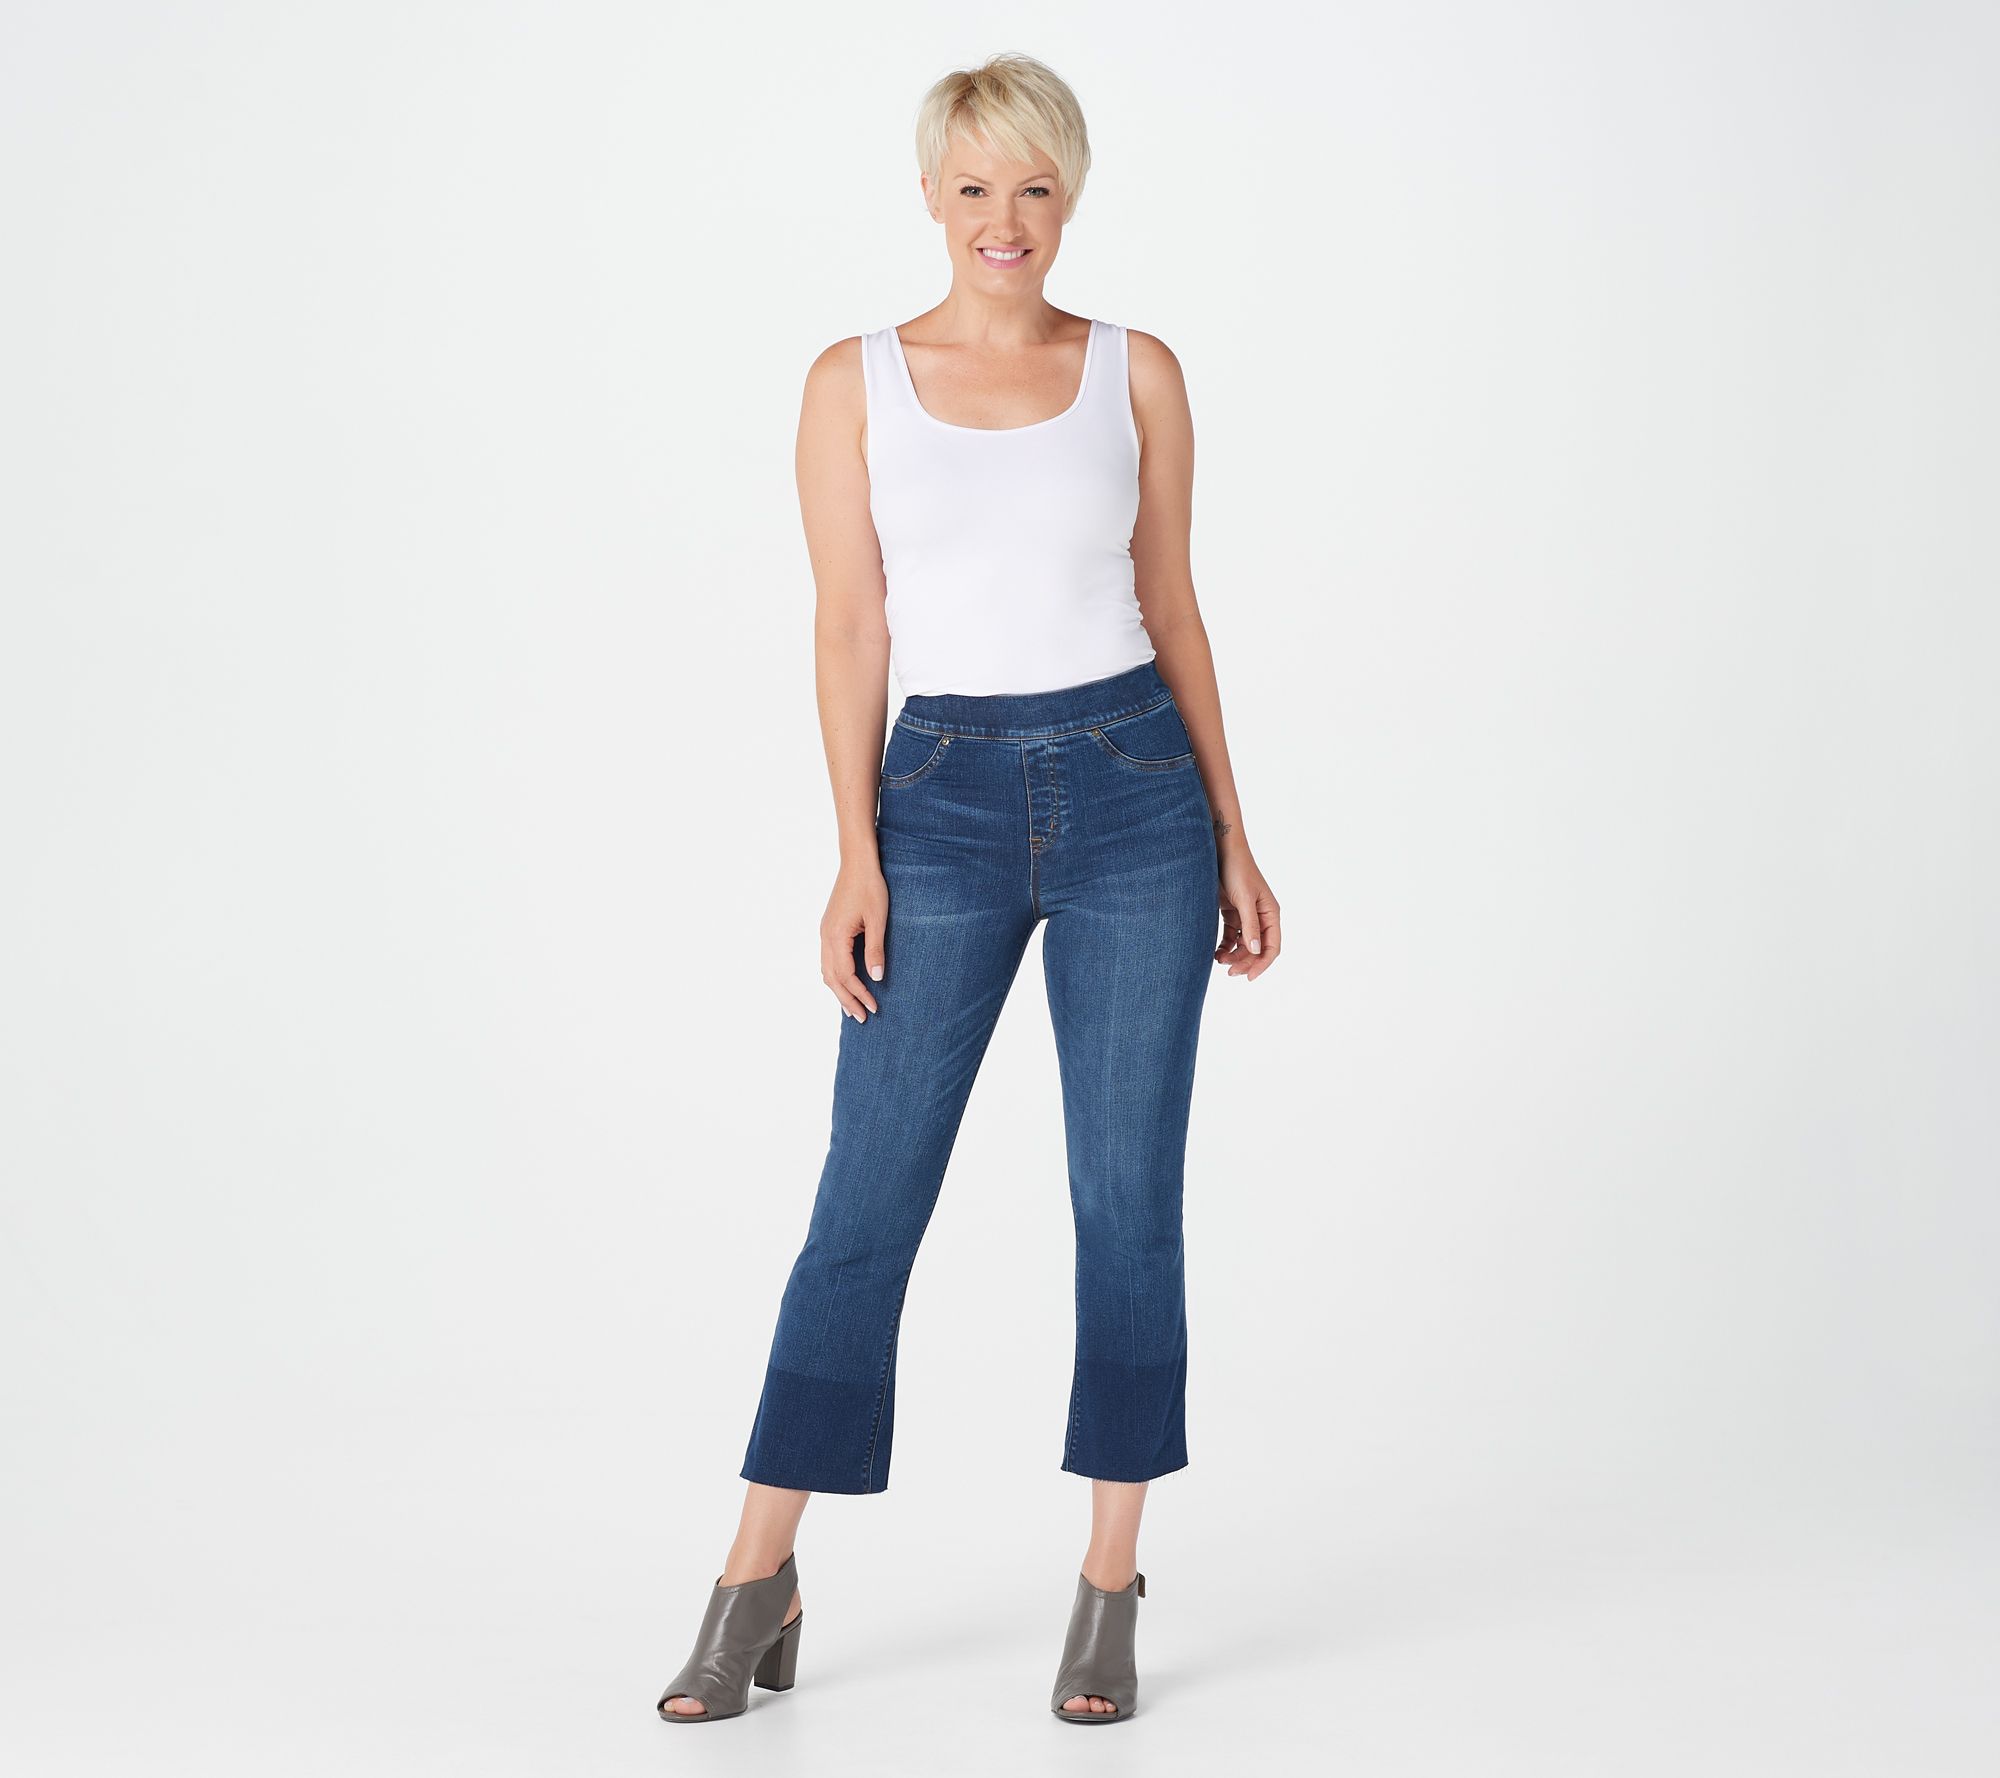 Spanx Jeans Reviews: Are They Worth It?